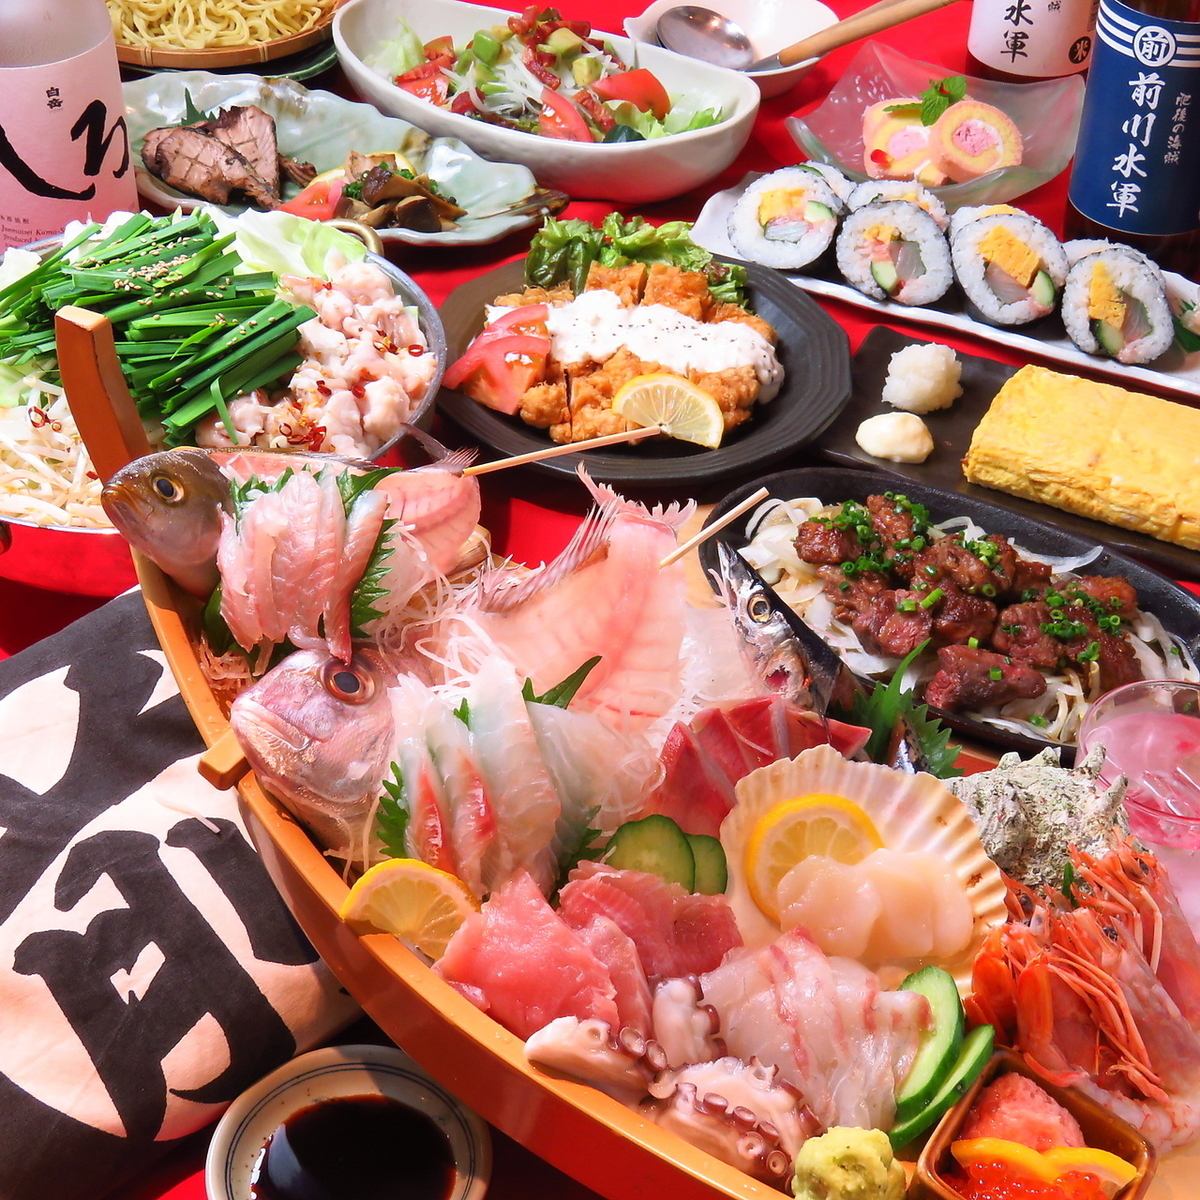 Great attention is paid to the [Toro Box], which is filled with fresh live fish!